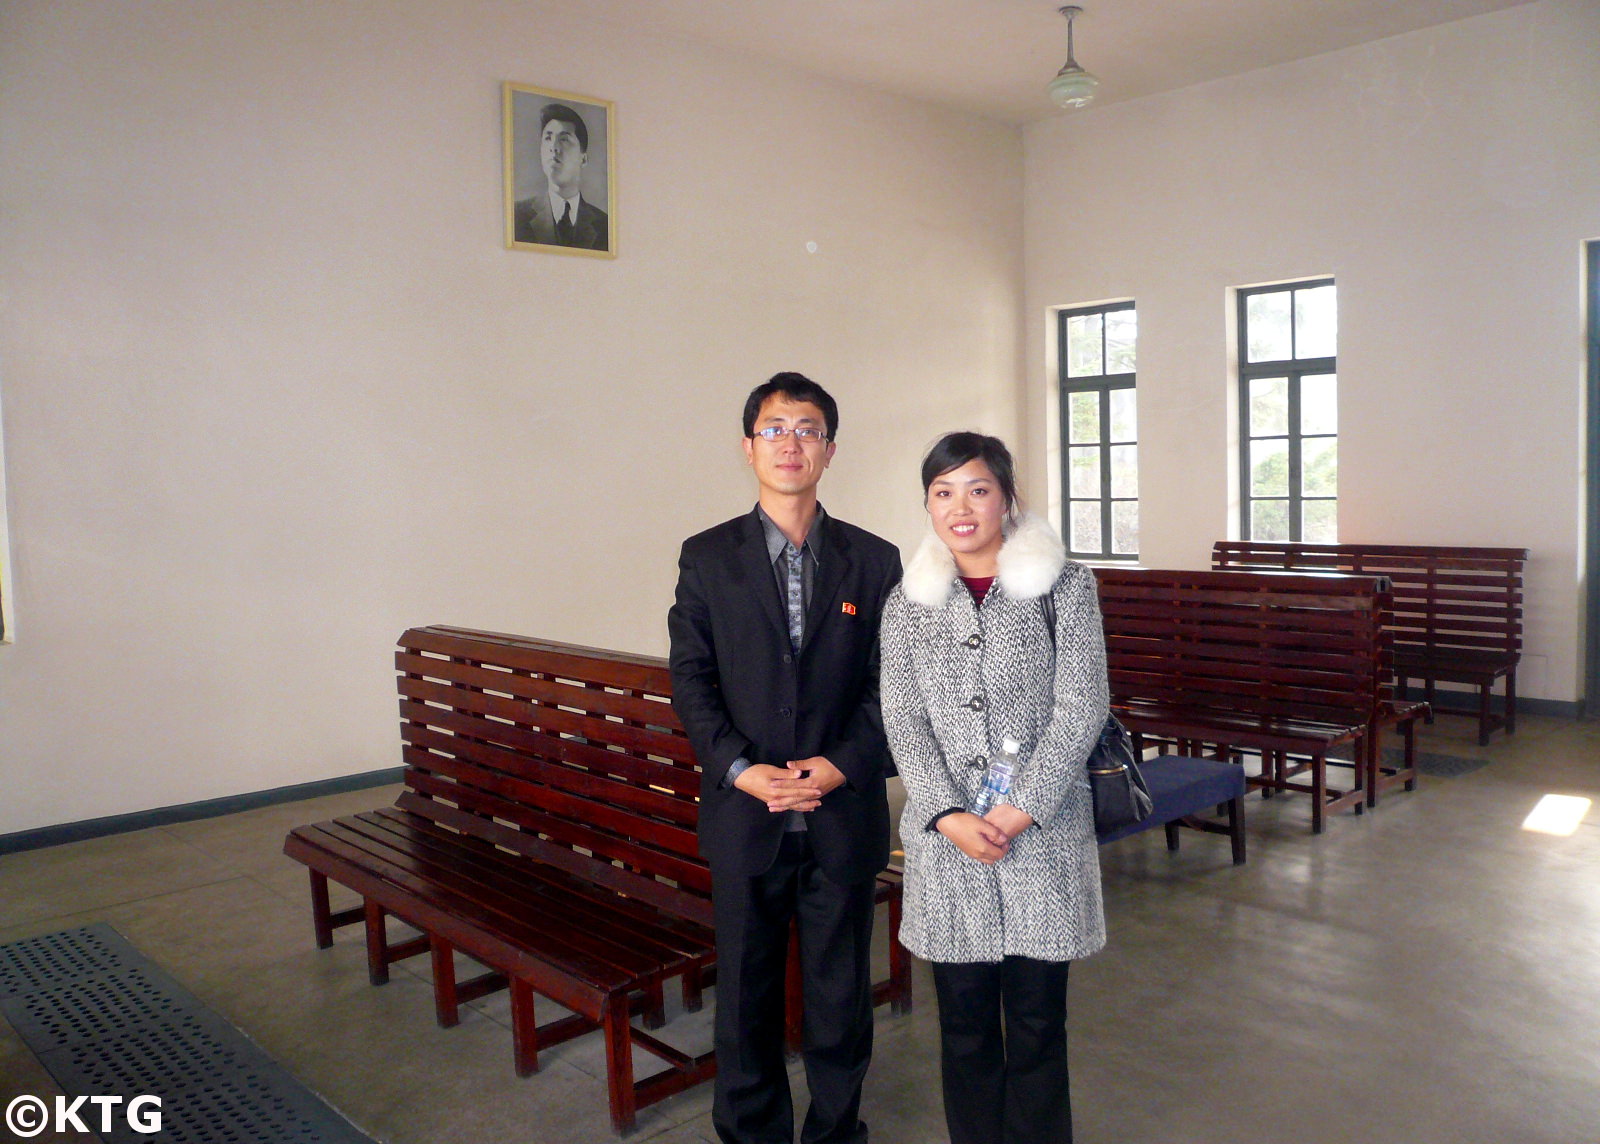 North Korean guides at the train station in Wonsan, DPRK. Picture taken by KTG Tours